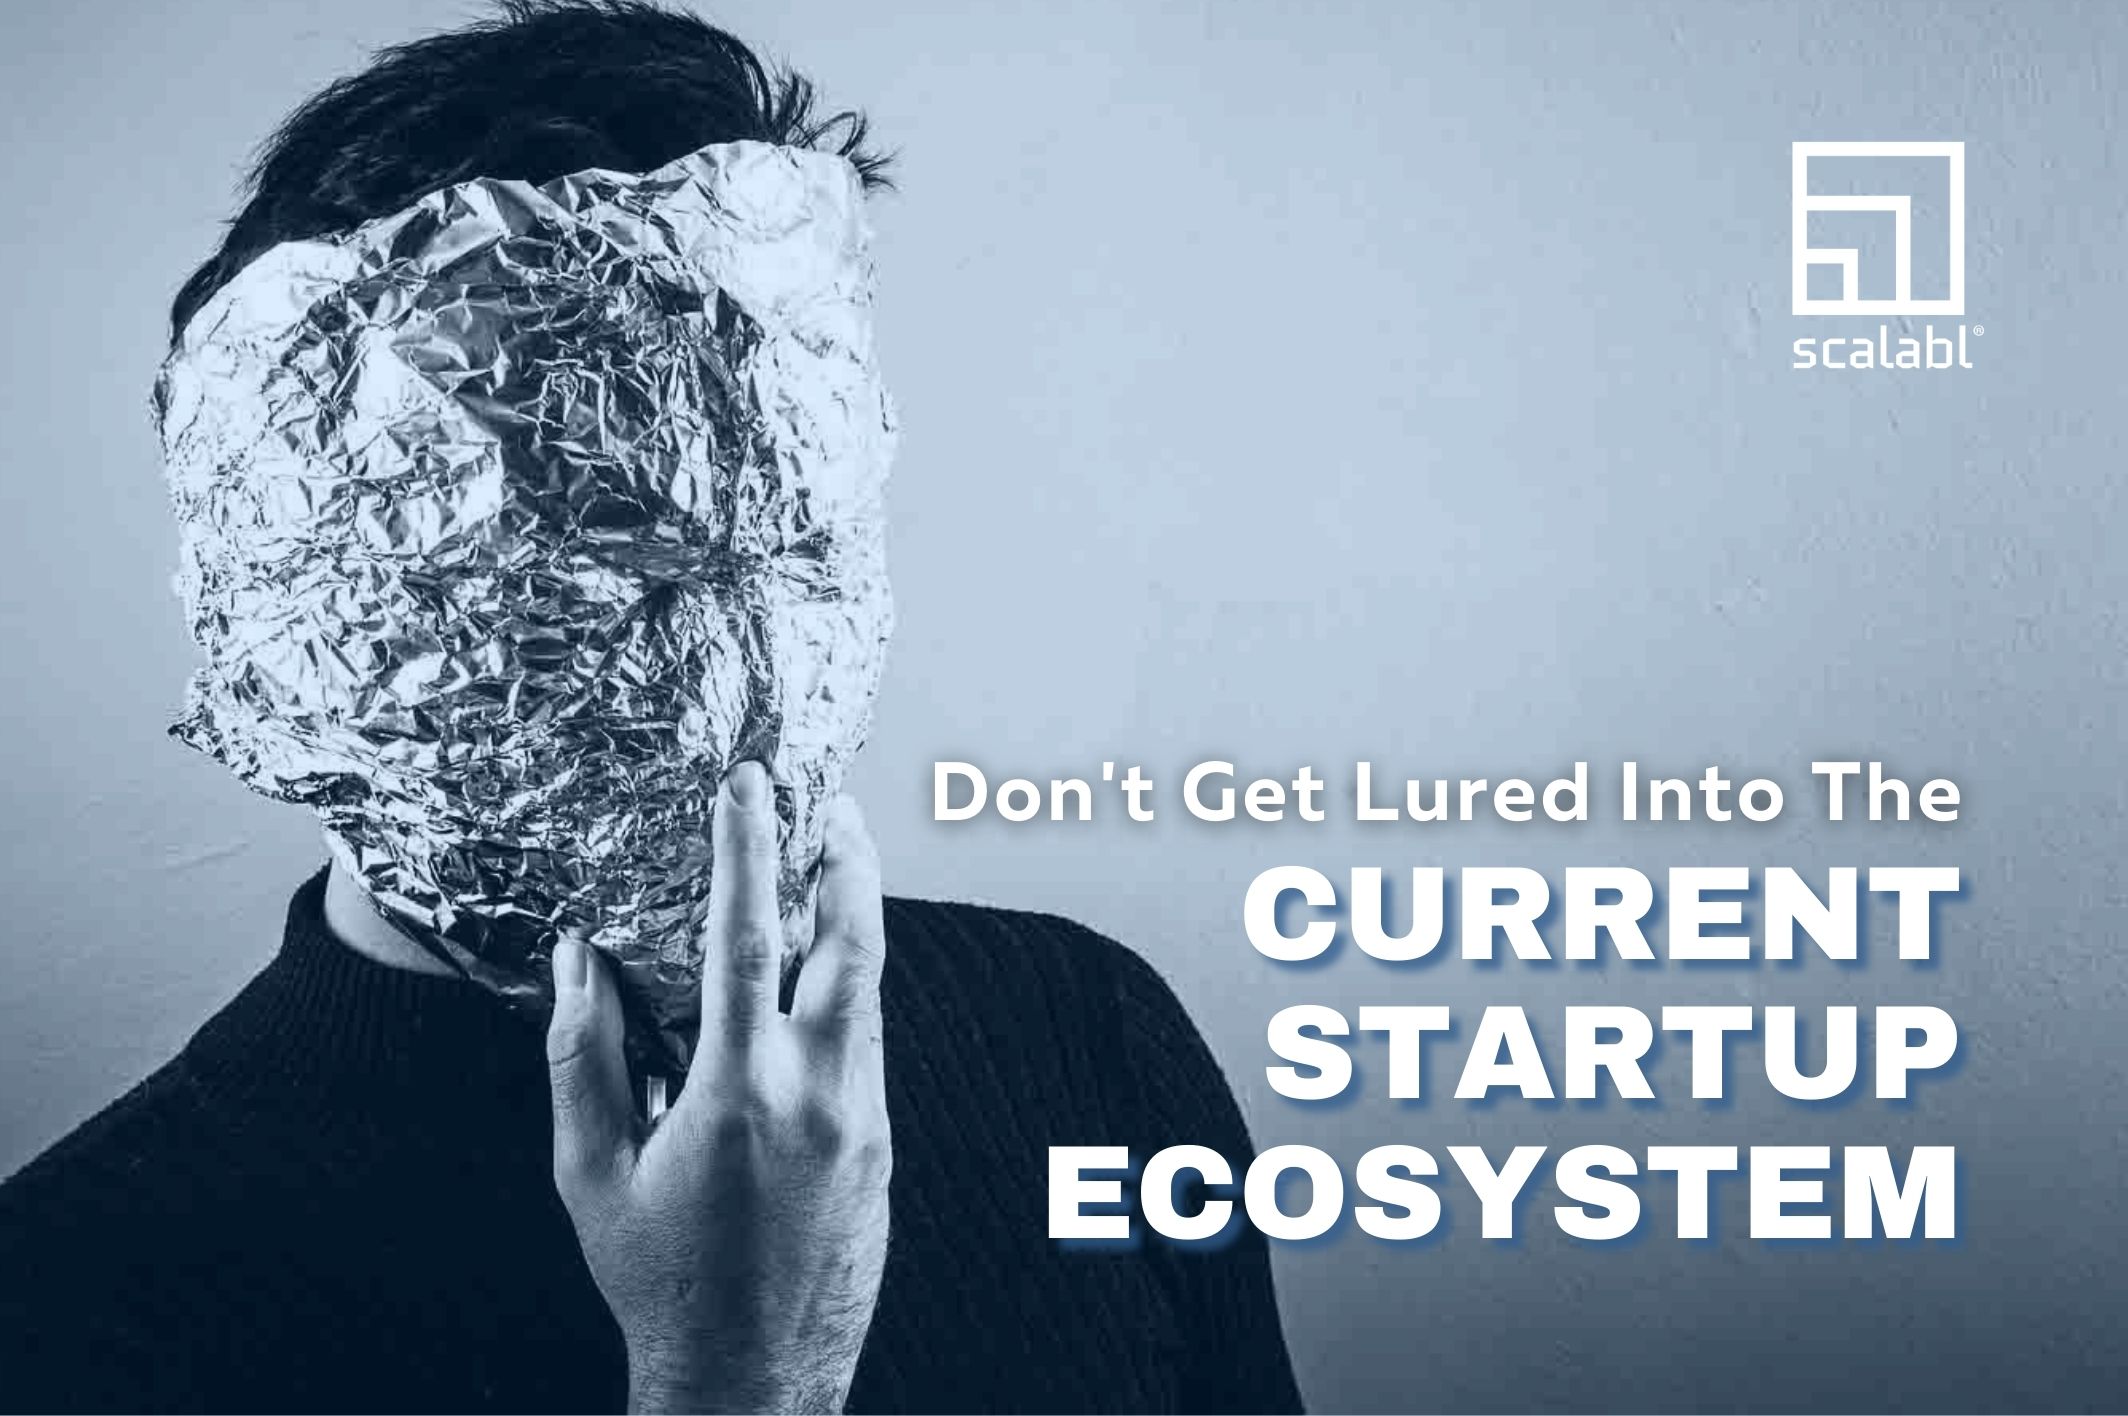 Don't Get Lured into the Current Startup Ecosystem